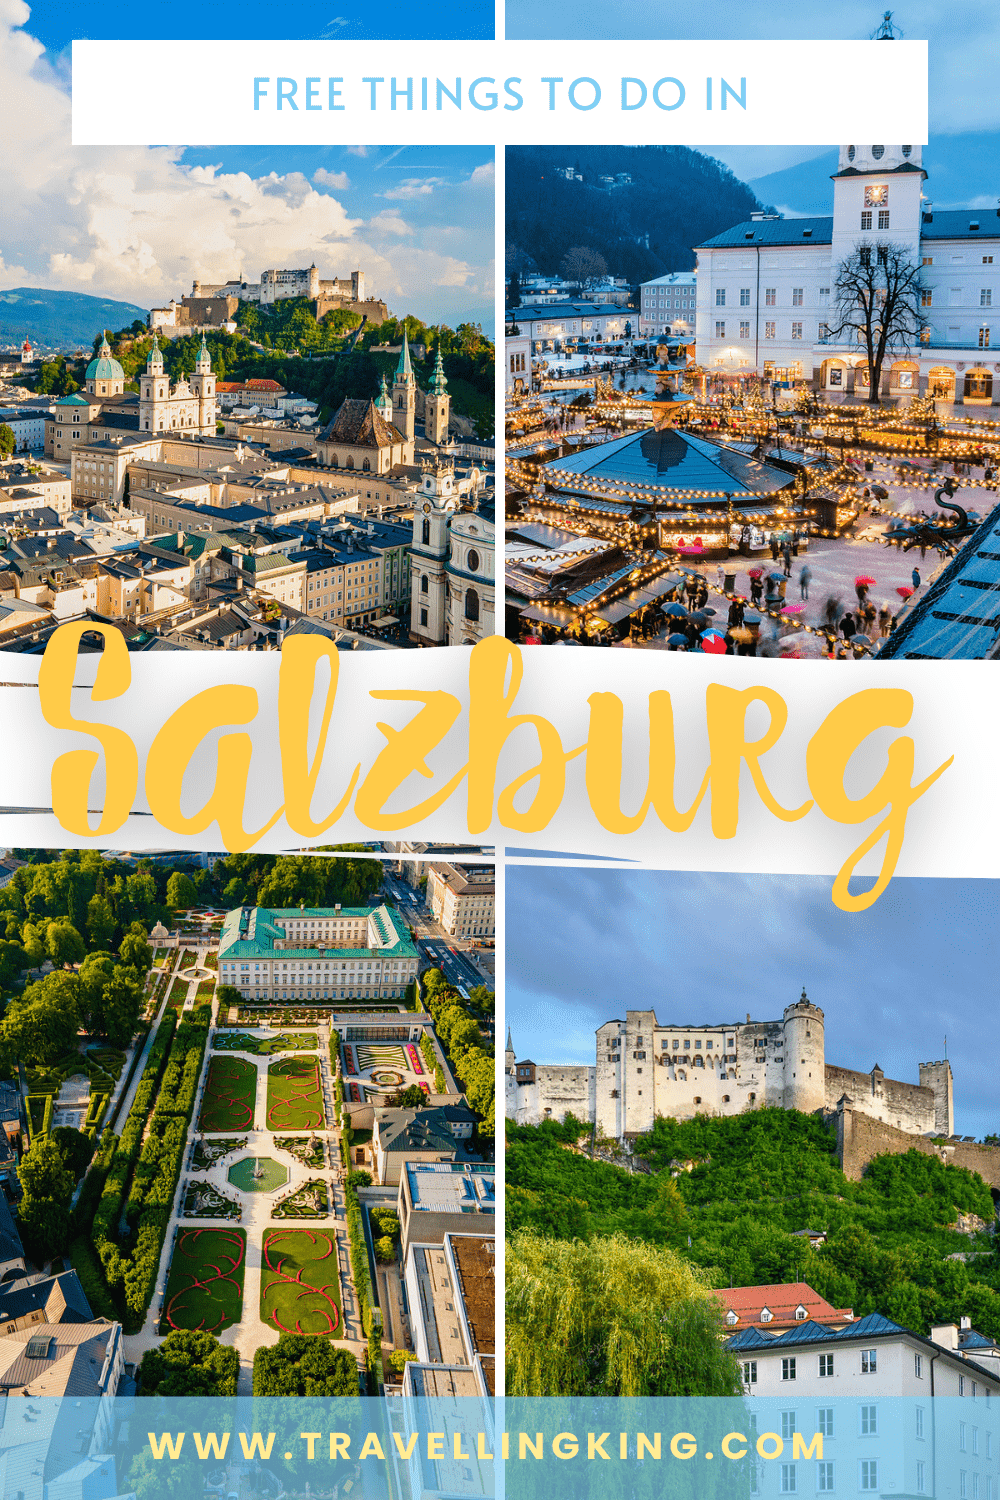 Free things to do in Salzburg